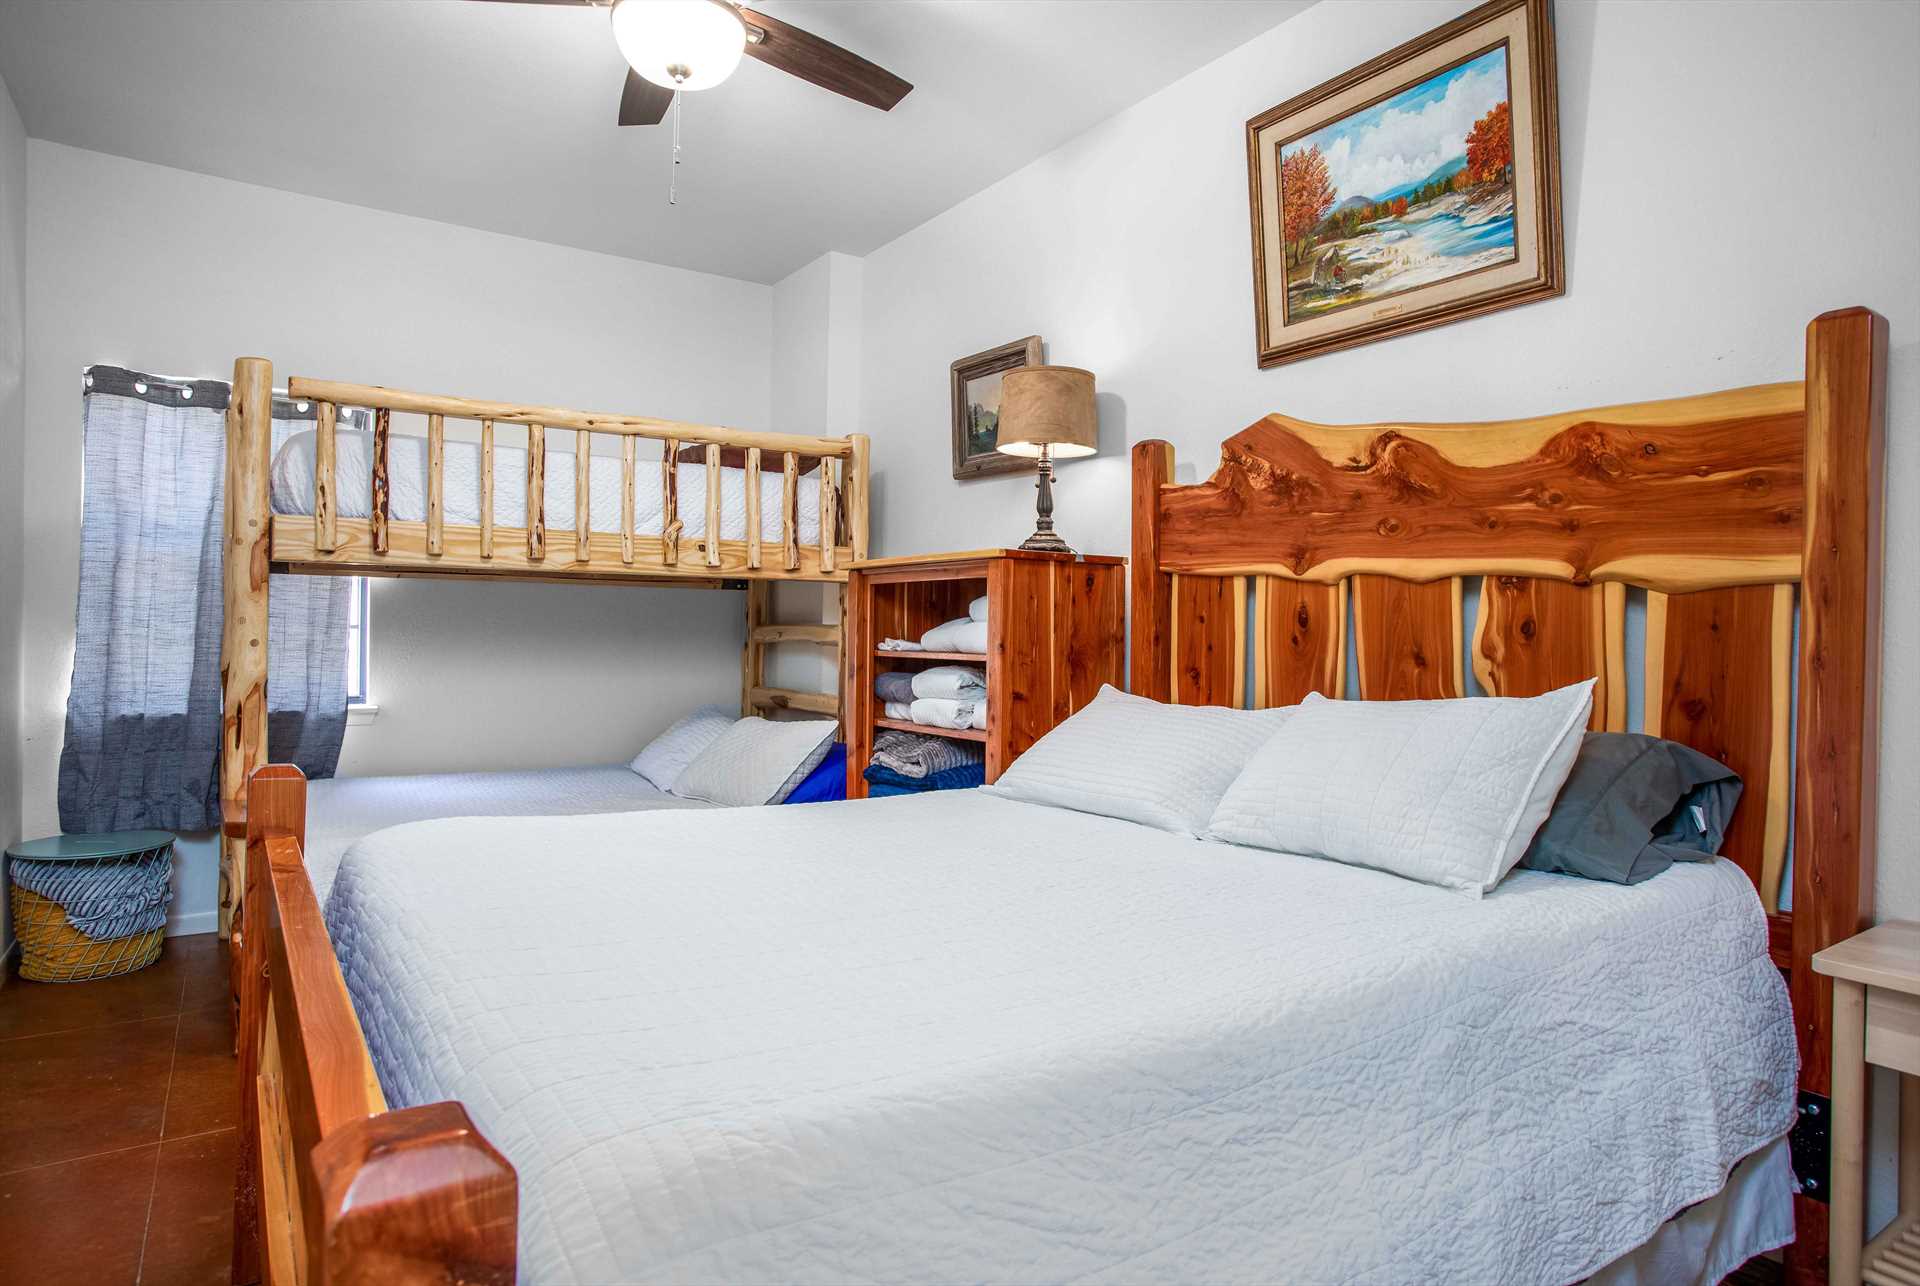                                                 You'll find another queen-sized bed and twin/full bunk set in the second bedroom. All the beds here are framed in sturdy and unique woodwork!